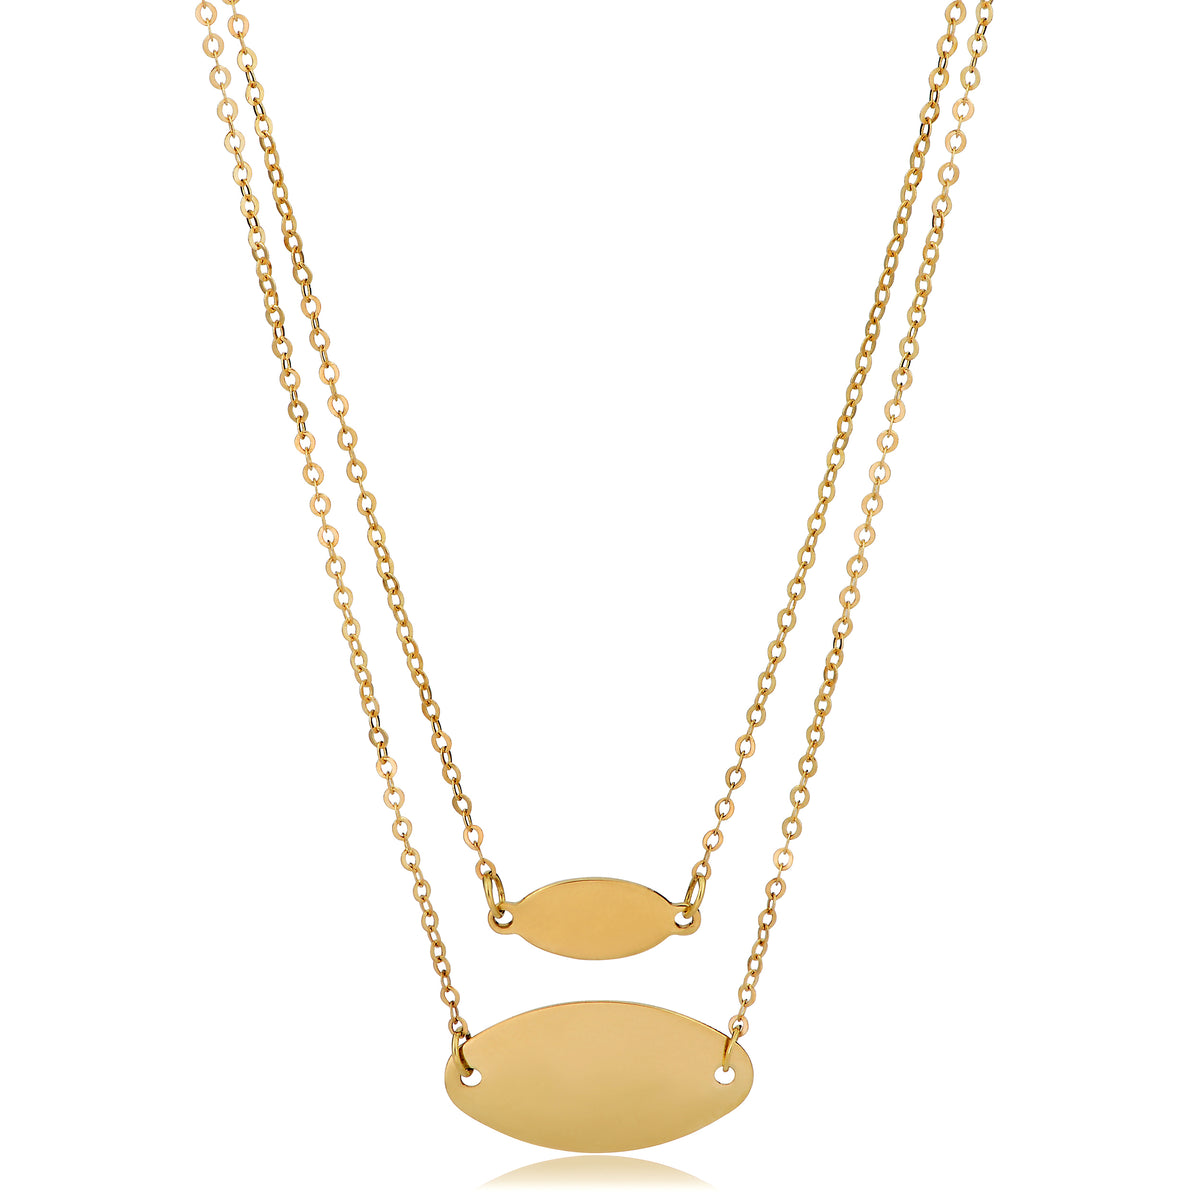 14K Yellow Gold Graduated Oval Disc Layered Necklace, 18" fine designer jewelry for men and women